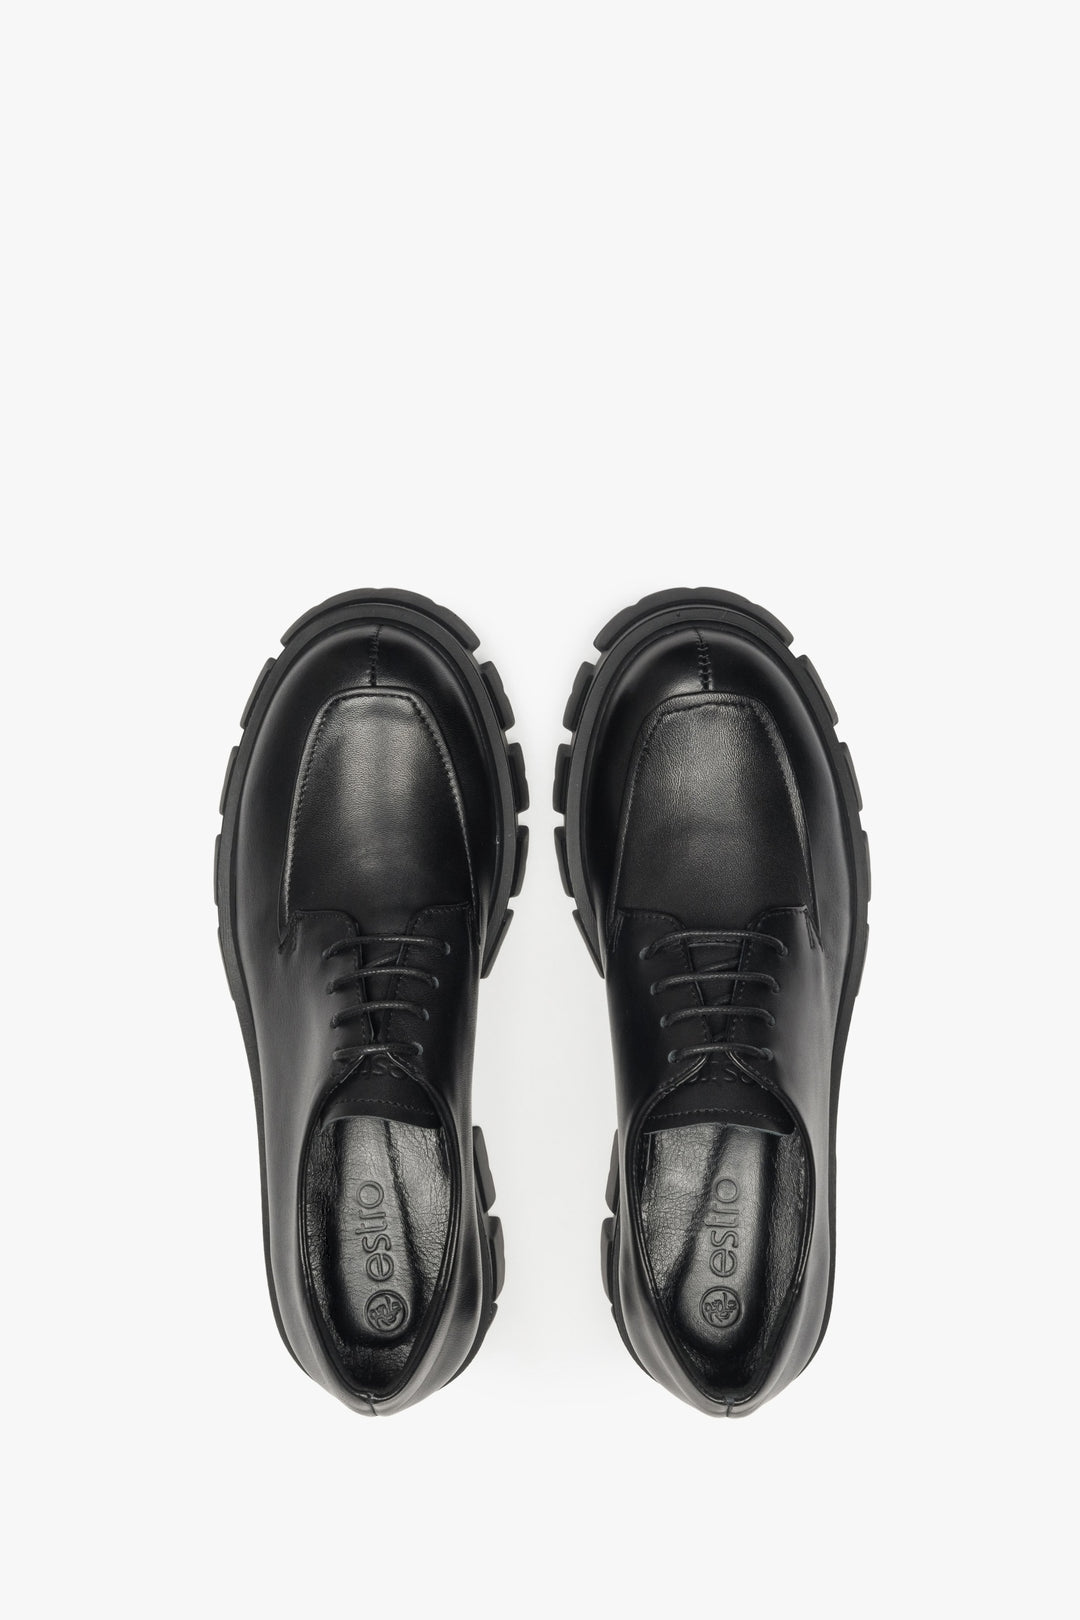 Lace-up women's leather shoes in black - top view presentation of the footwear.